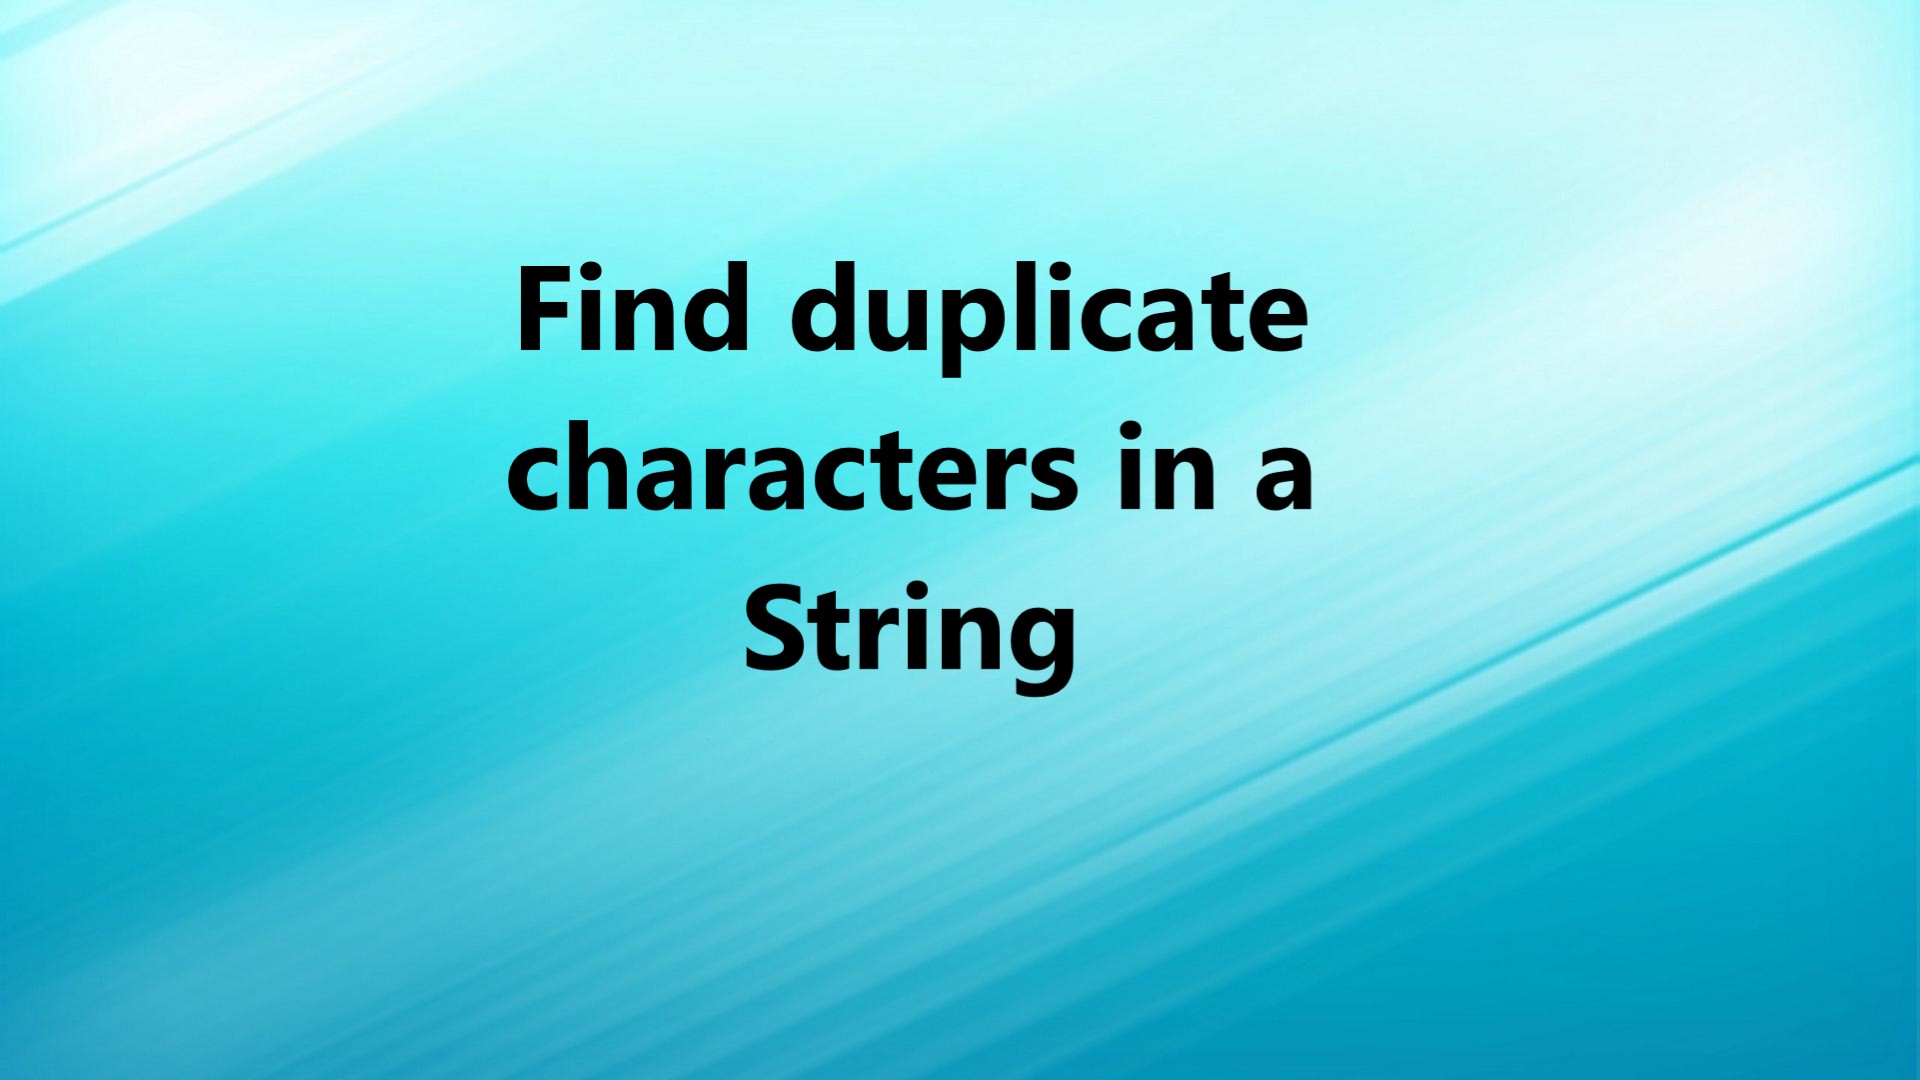 Find duplicate characters in a String